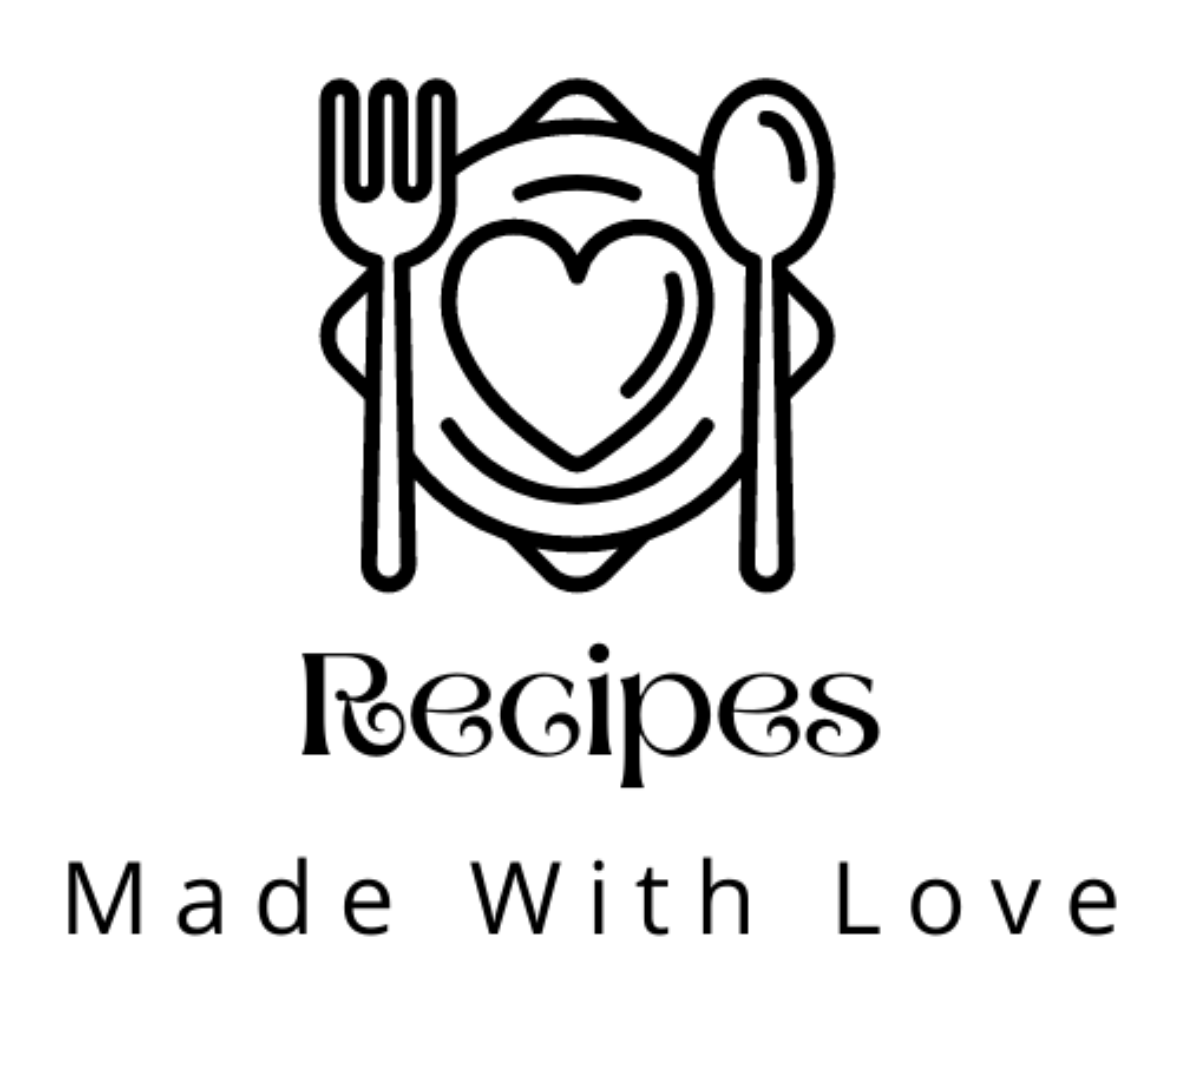 Food made with love